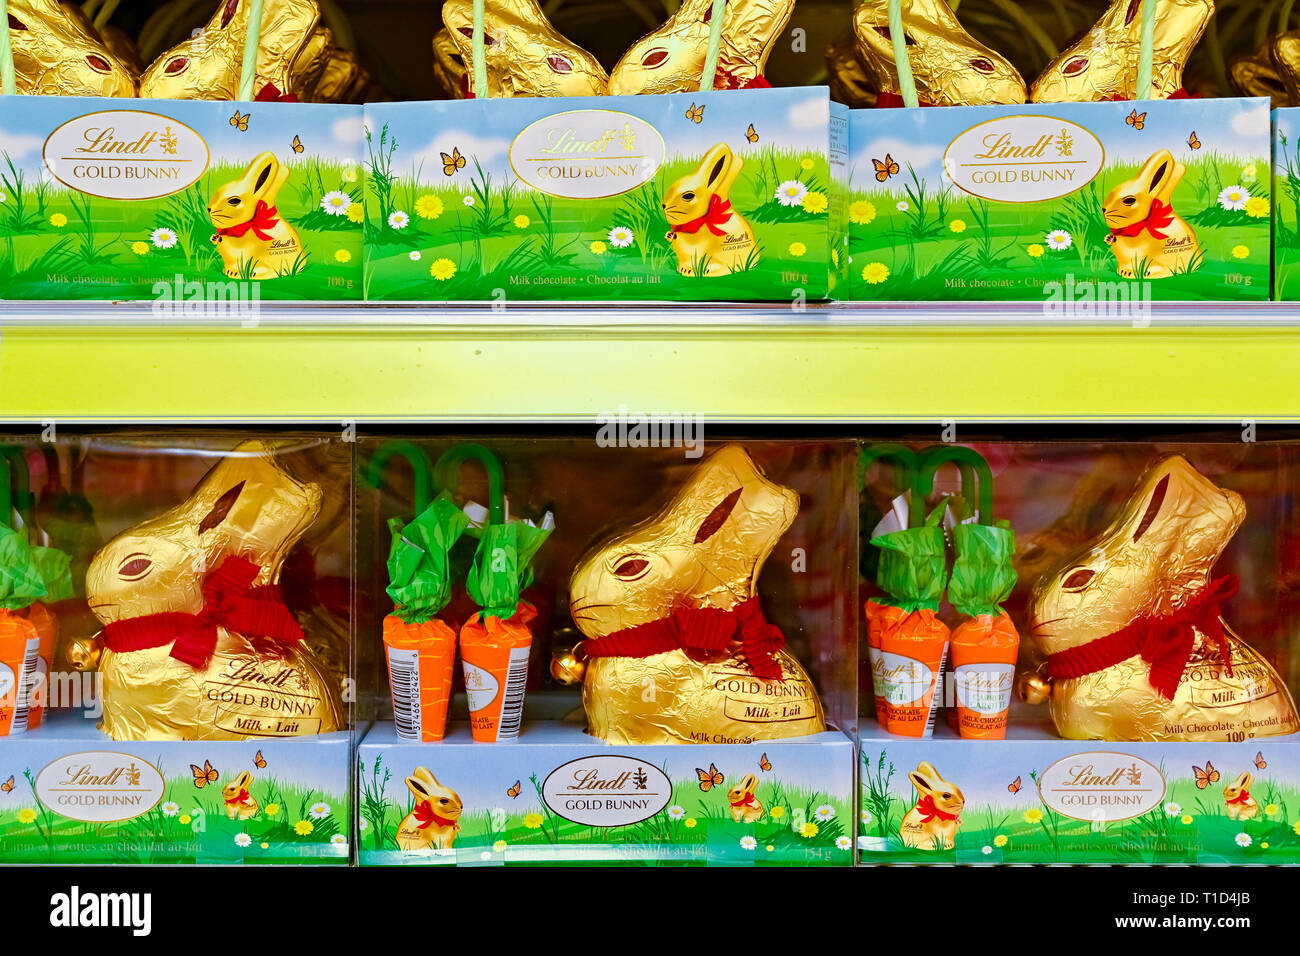 Foil wrapped Lindt Gold Bunny Chocolate Easter bunnies on store shelf Stock Photo